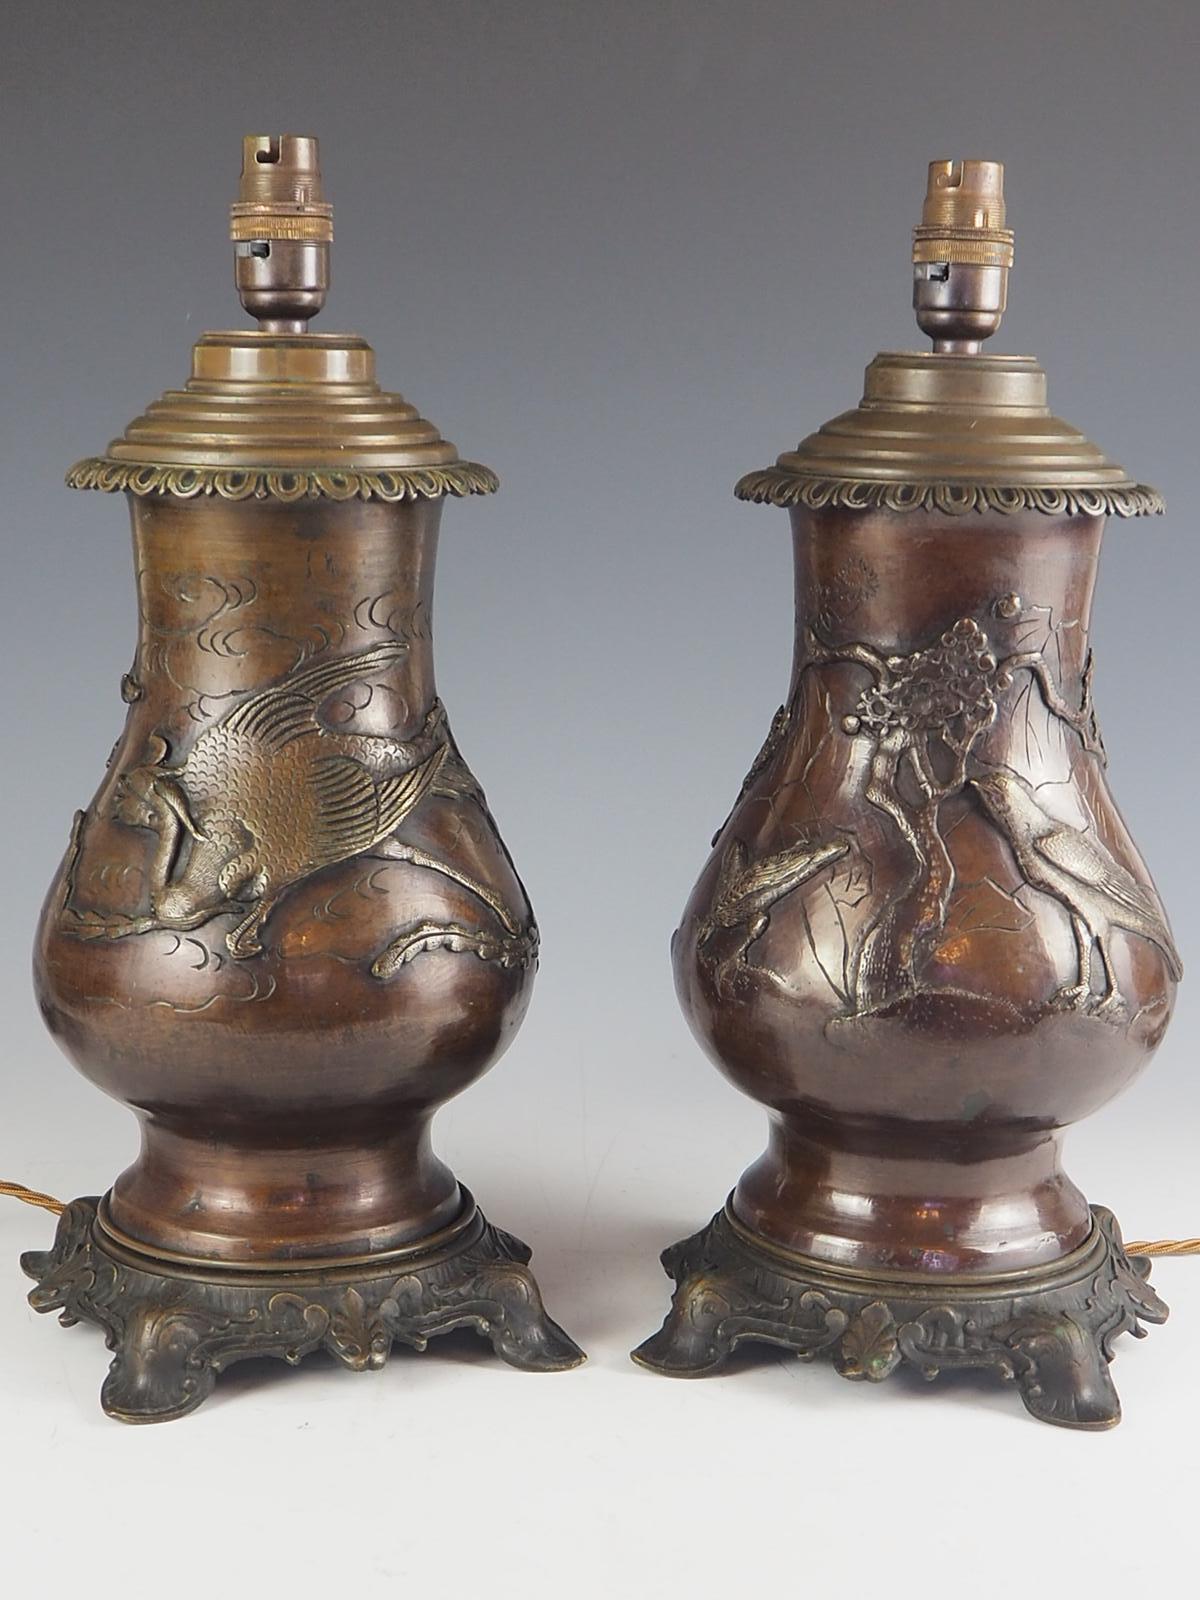 A beautiful pair of Japanese bronze oil lamps from c.1880 now converted to electricity.

Finely cast and detailed bronze with high relief impressive dragons, kites, birds, trees and fruit.

One vase is wrapped with a kite featuring a mythical